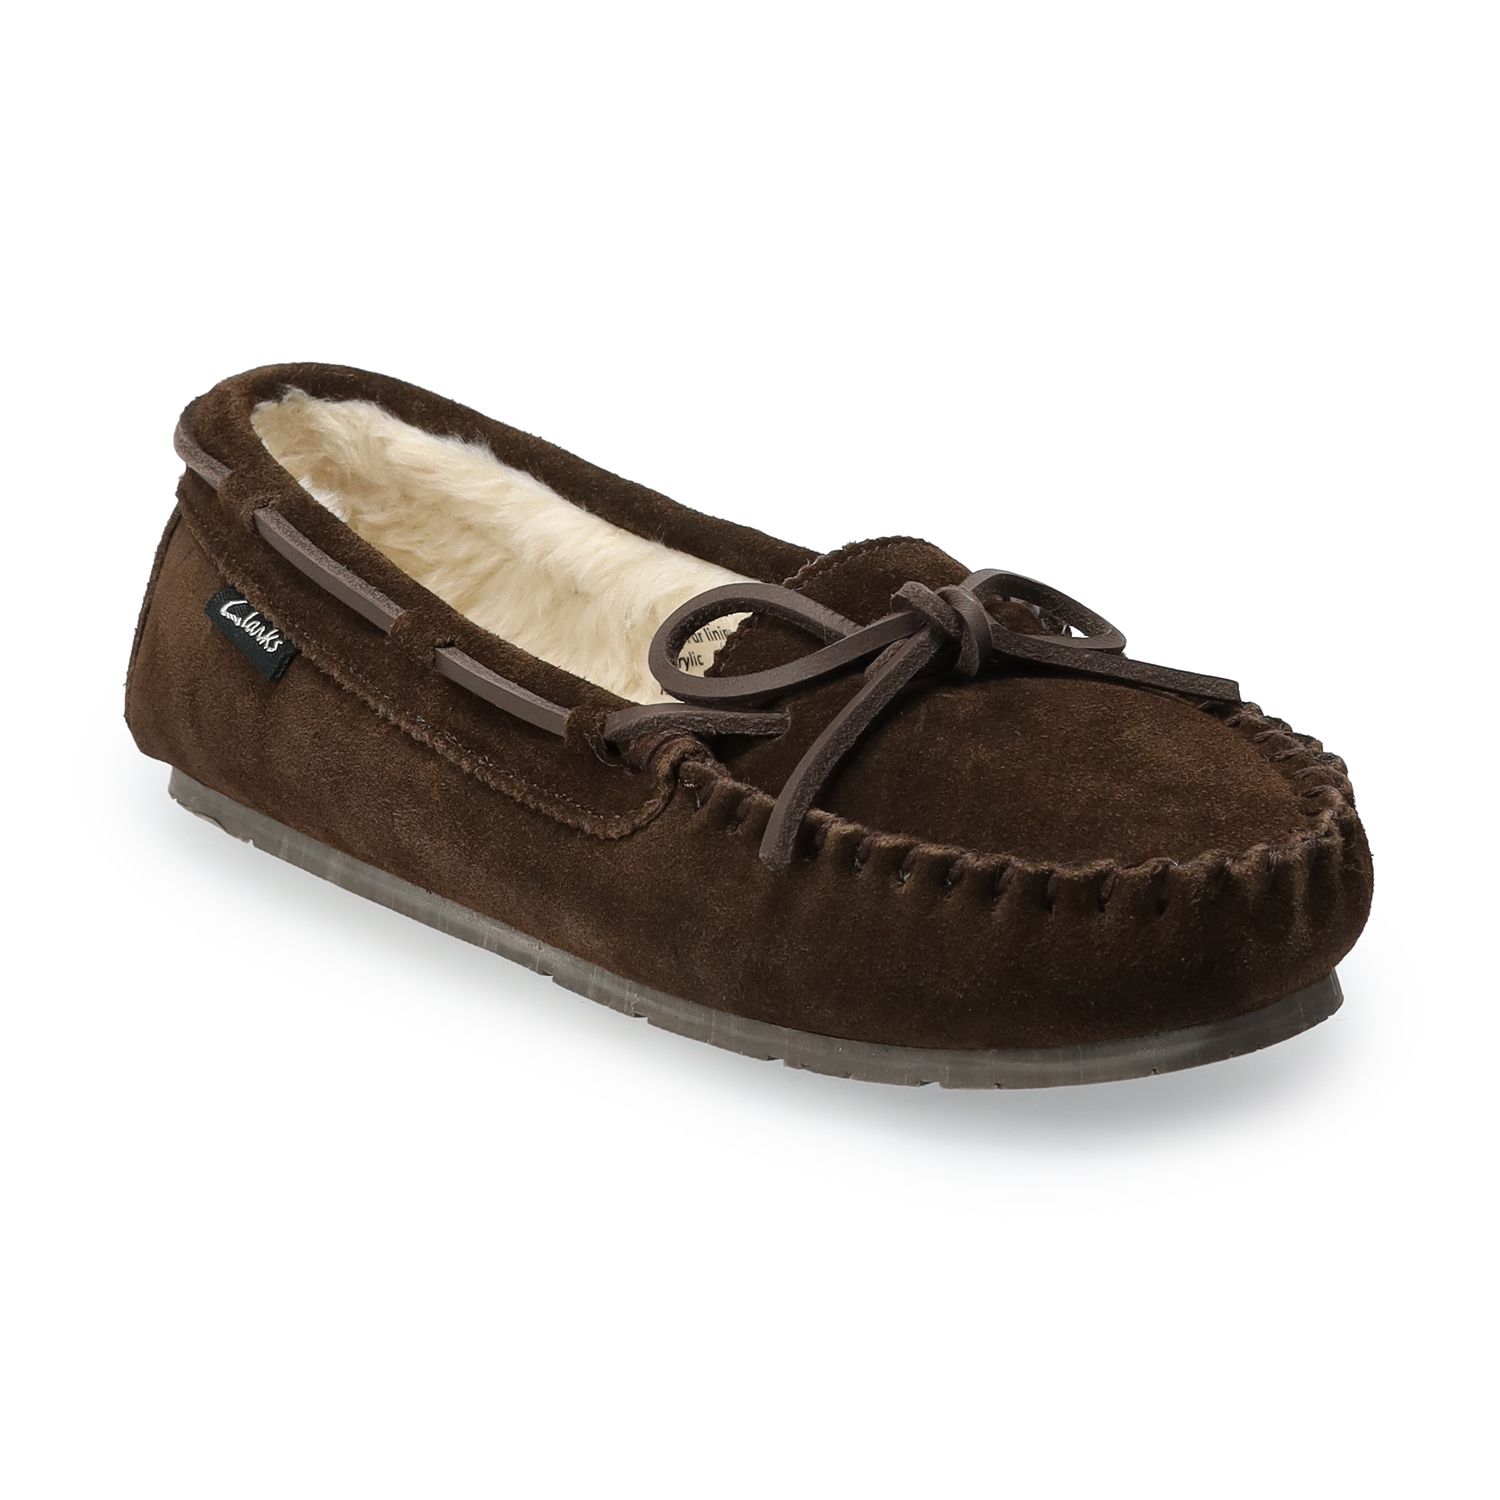 clarks home classic slippers